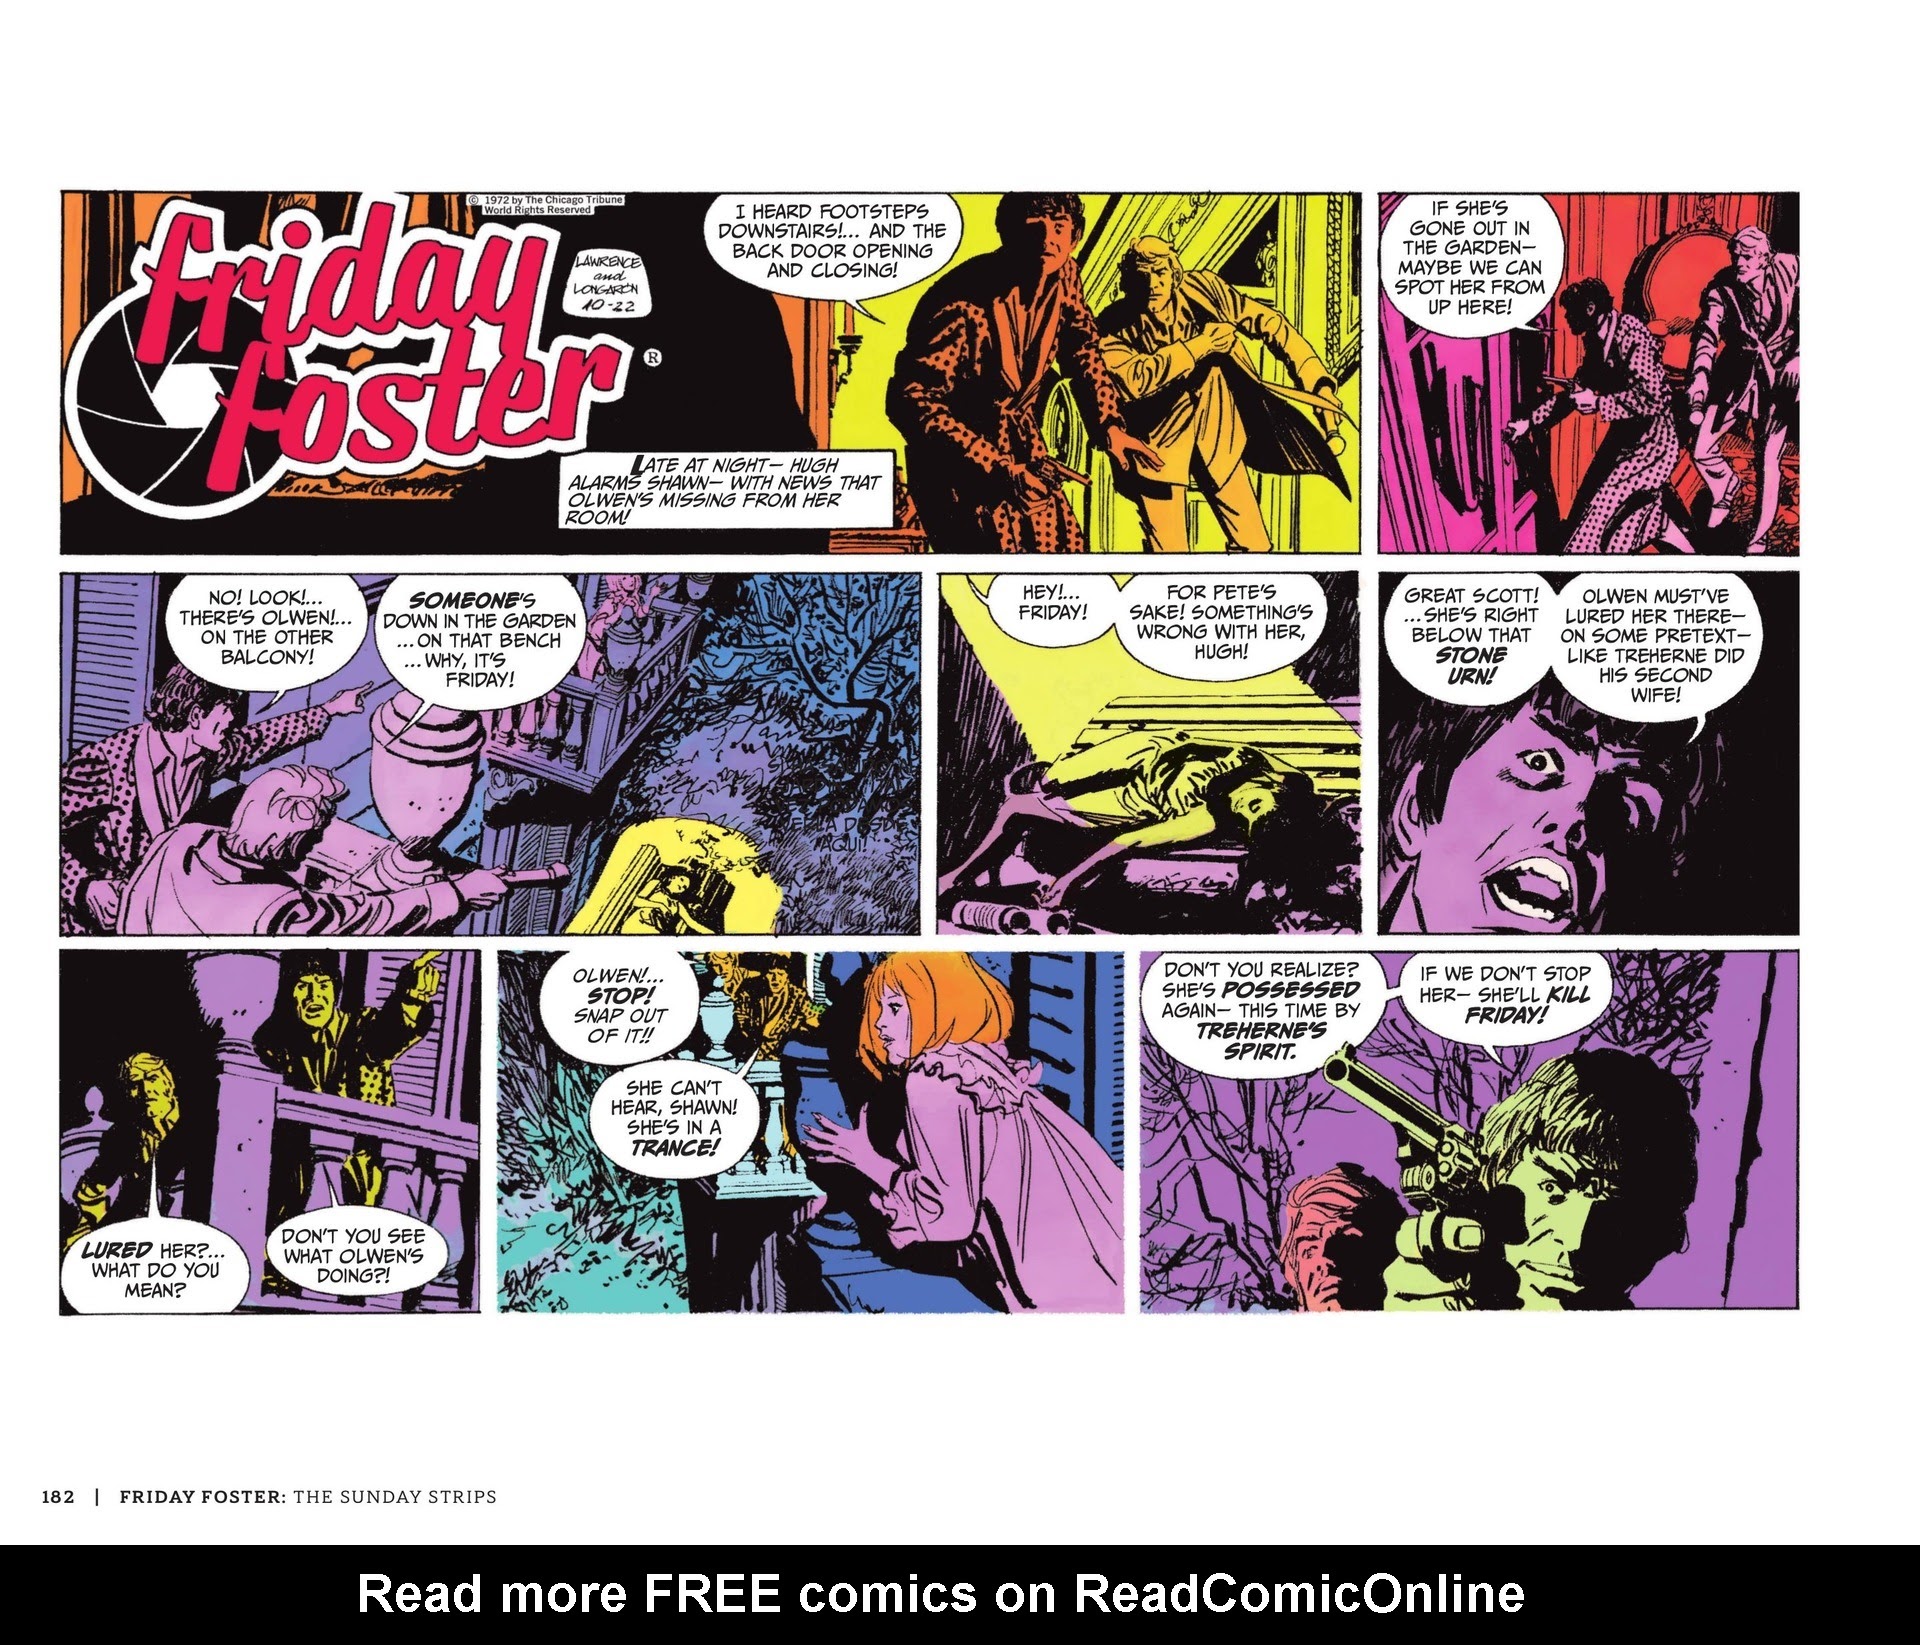 Read online Friday Foster: The Sunday Strips comic -  Issue # TPB (Part 2) - 83